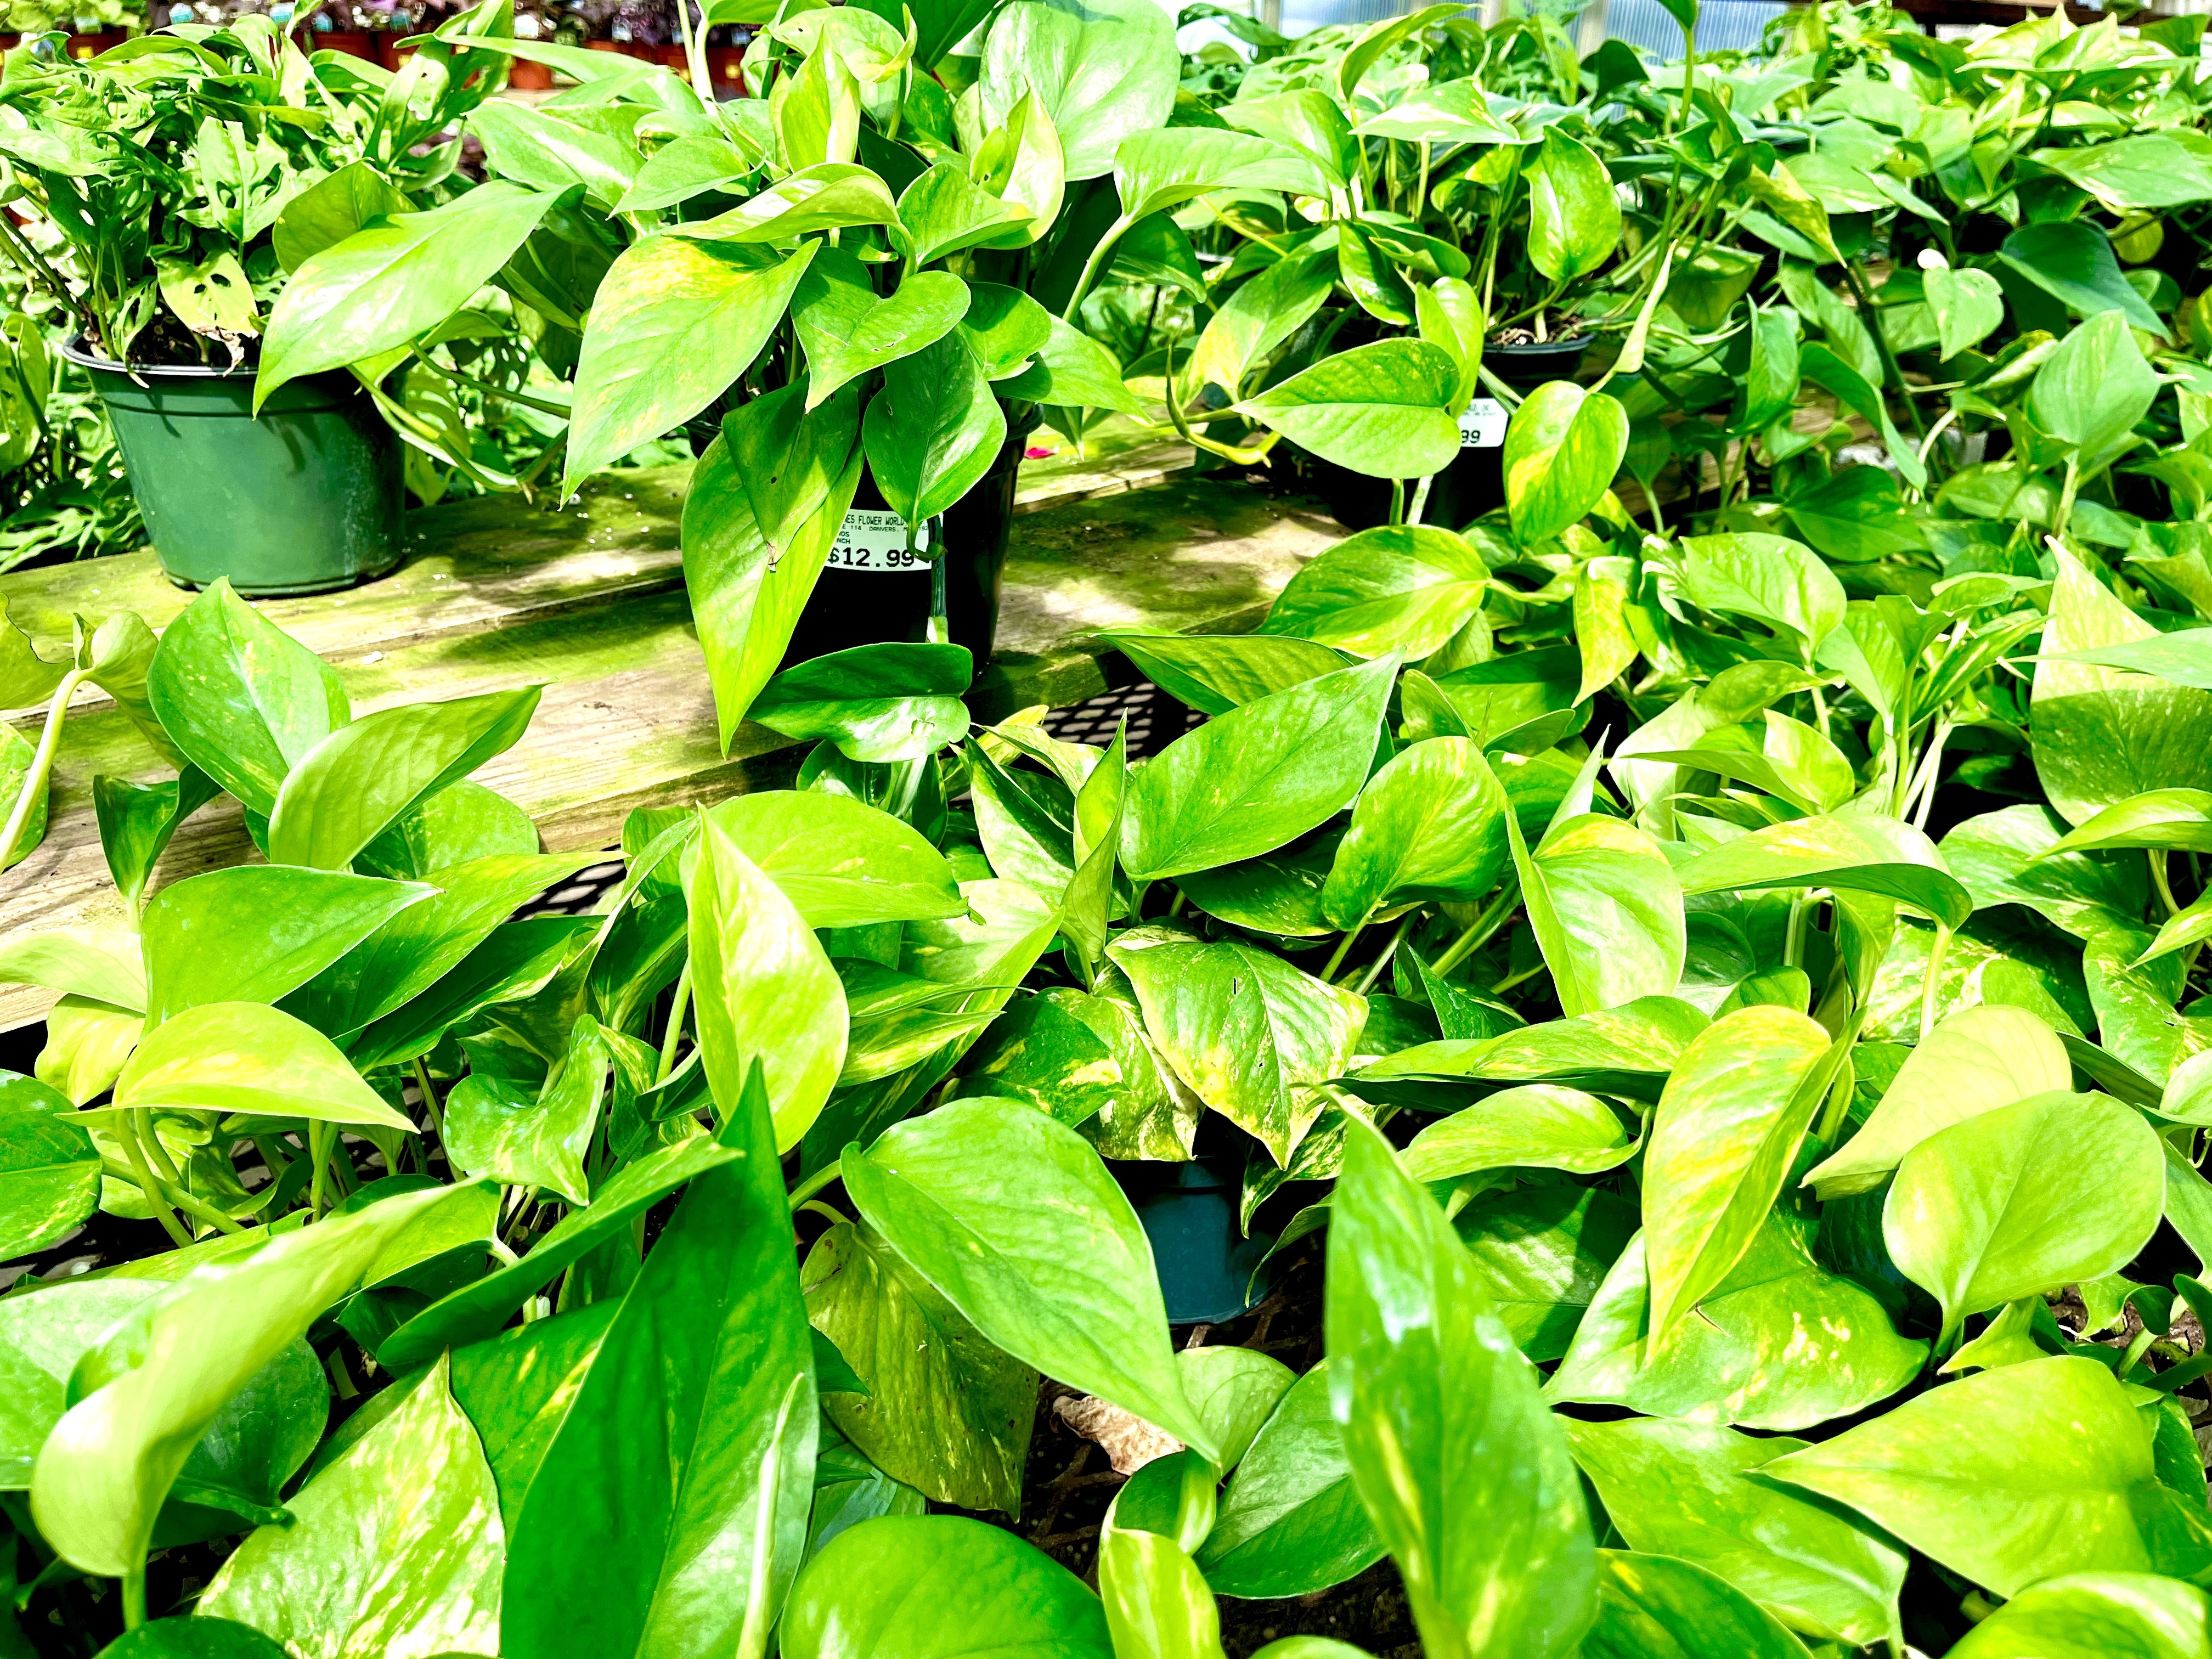 Several pothos plants gathered together in a greenhouse.